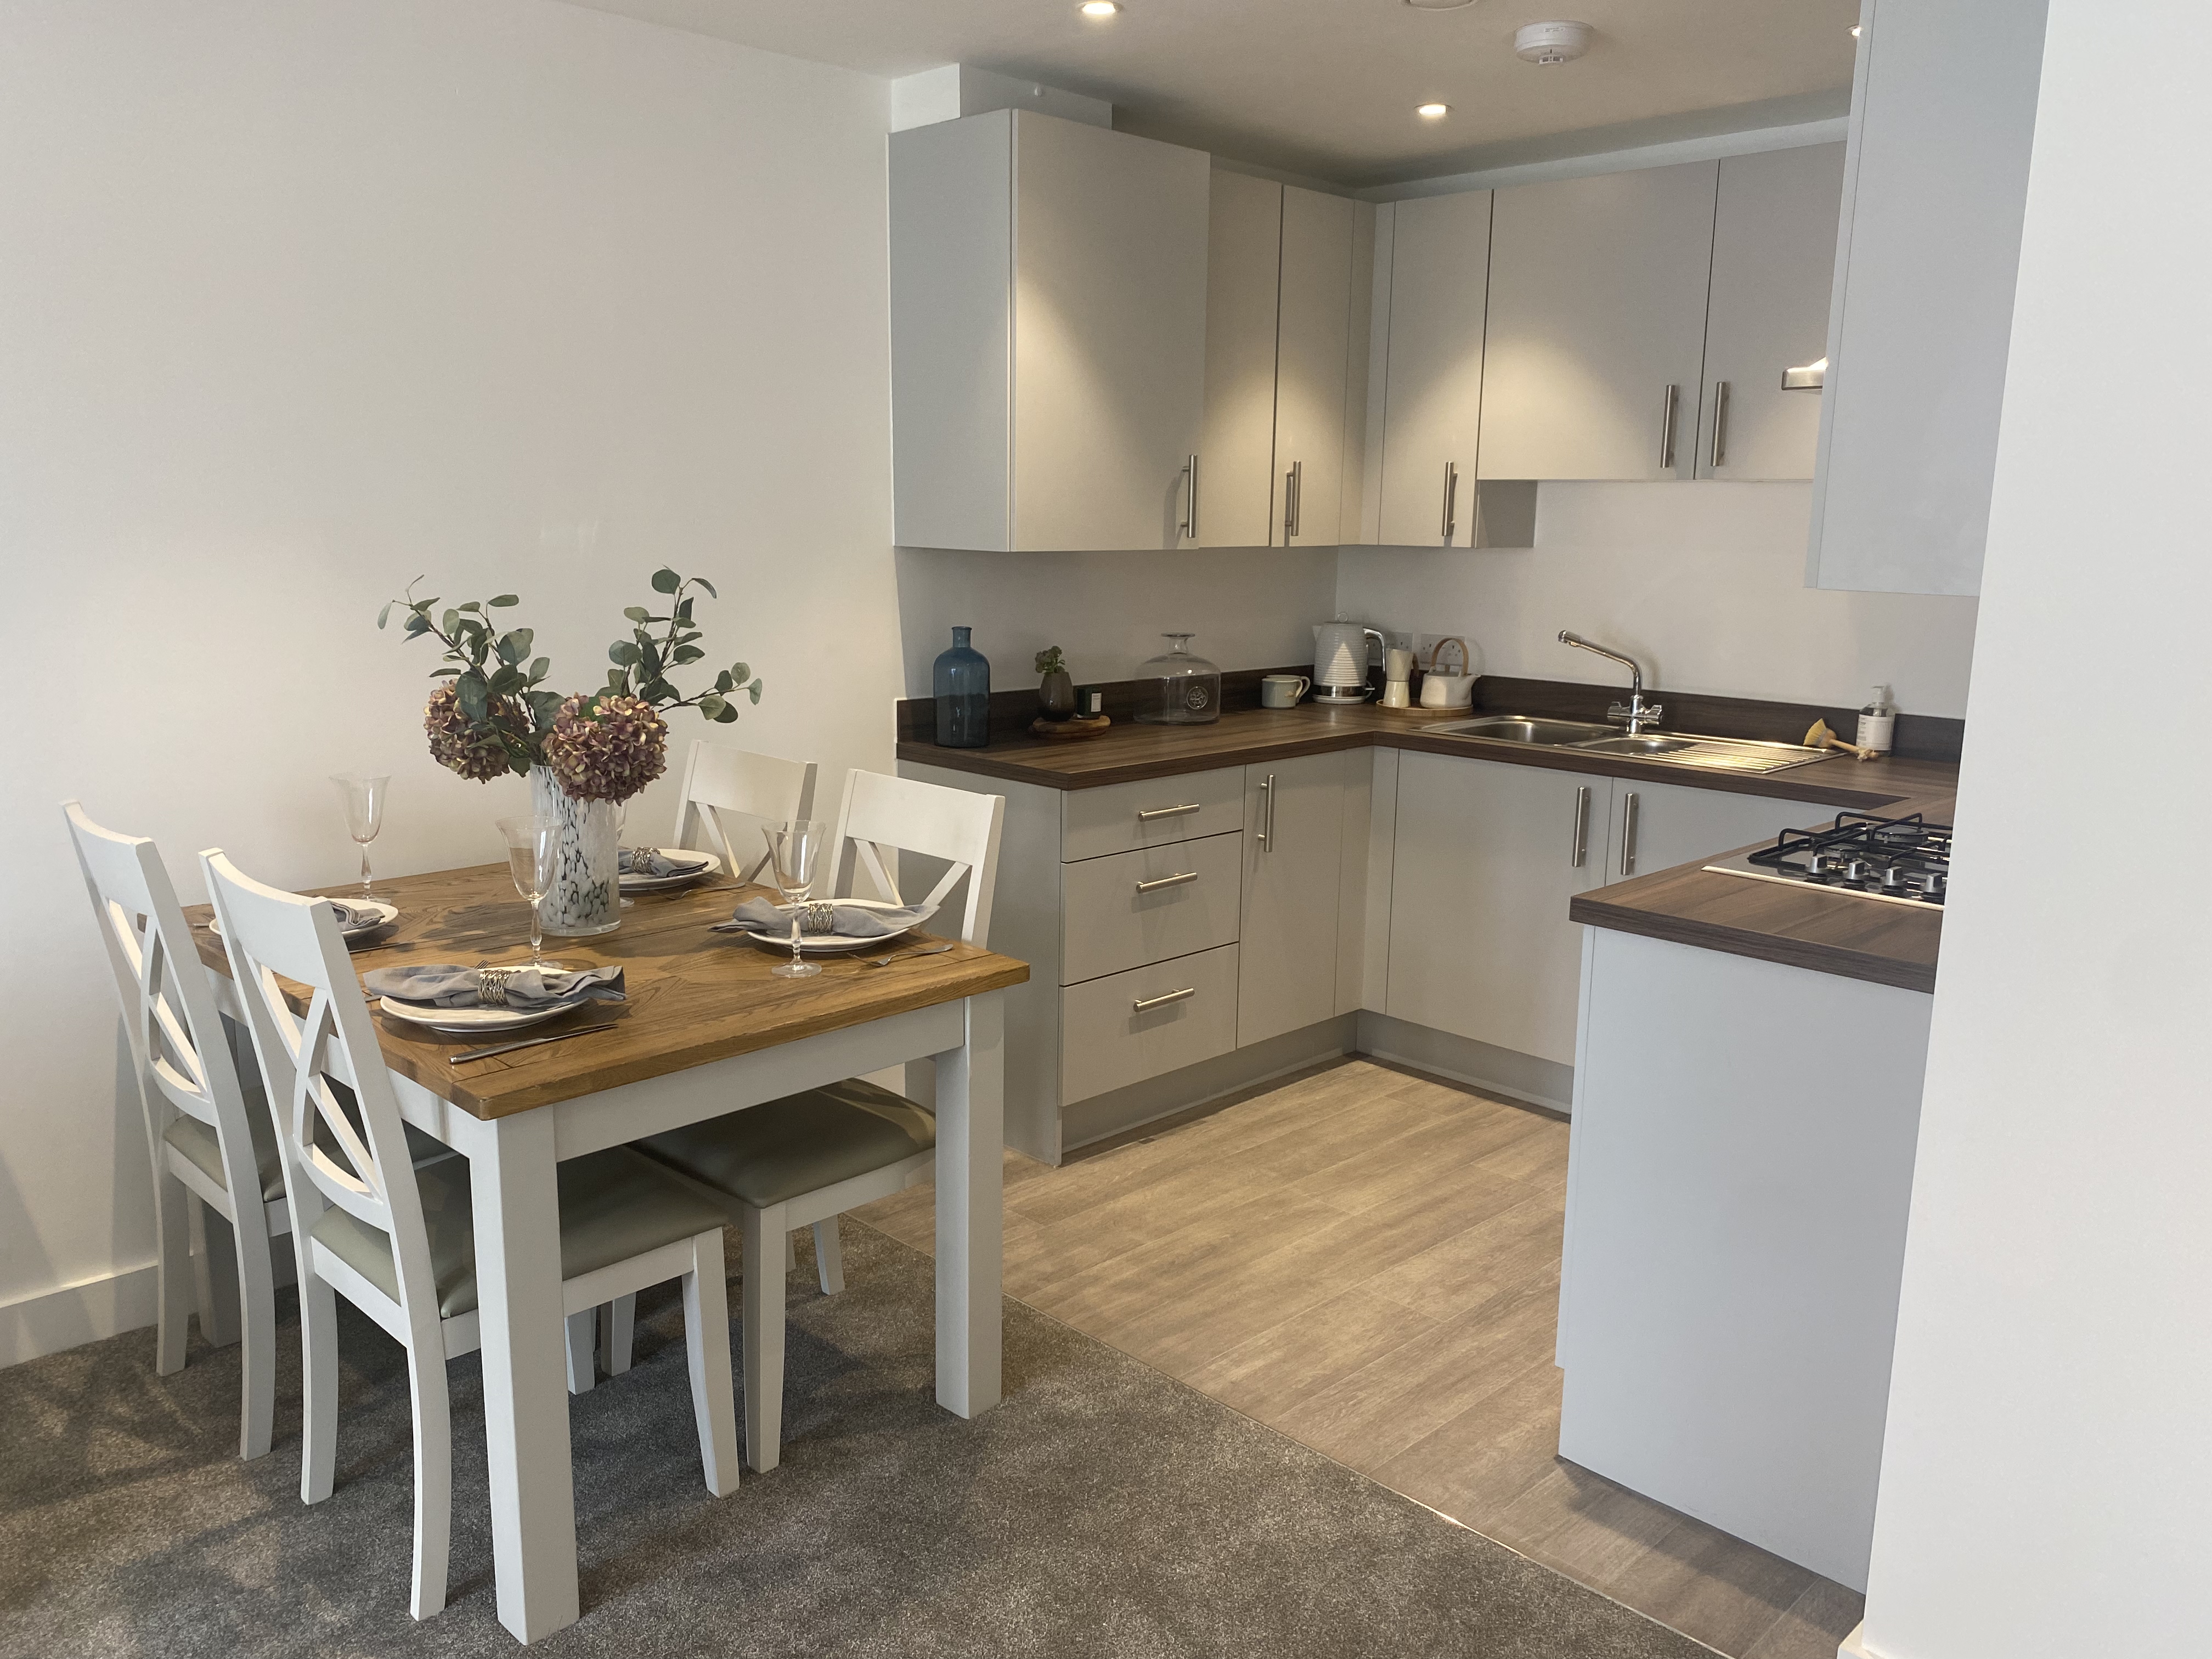 The Avenue Apartment Kitchen Example Images